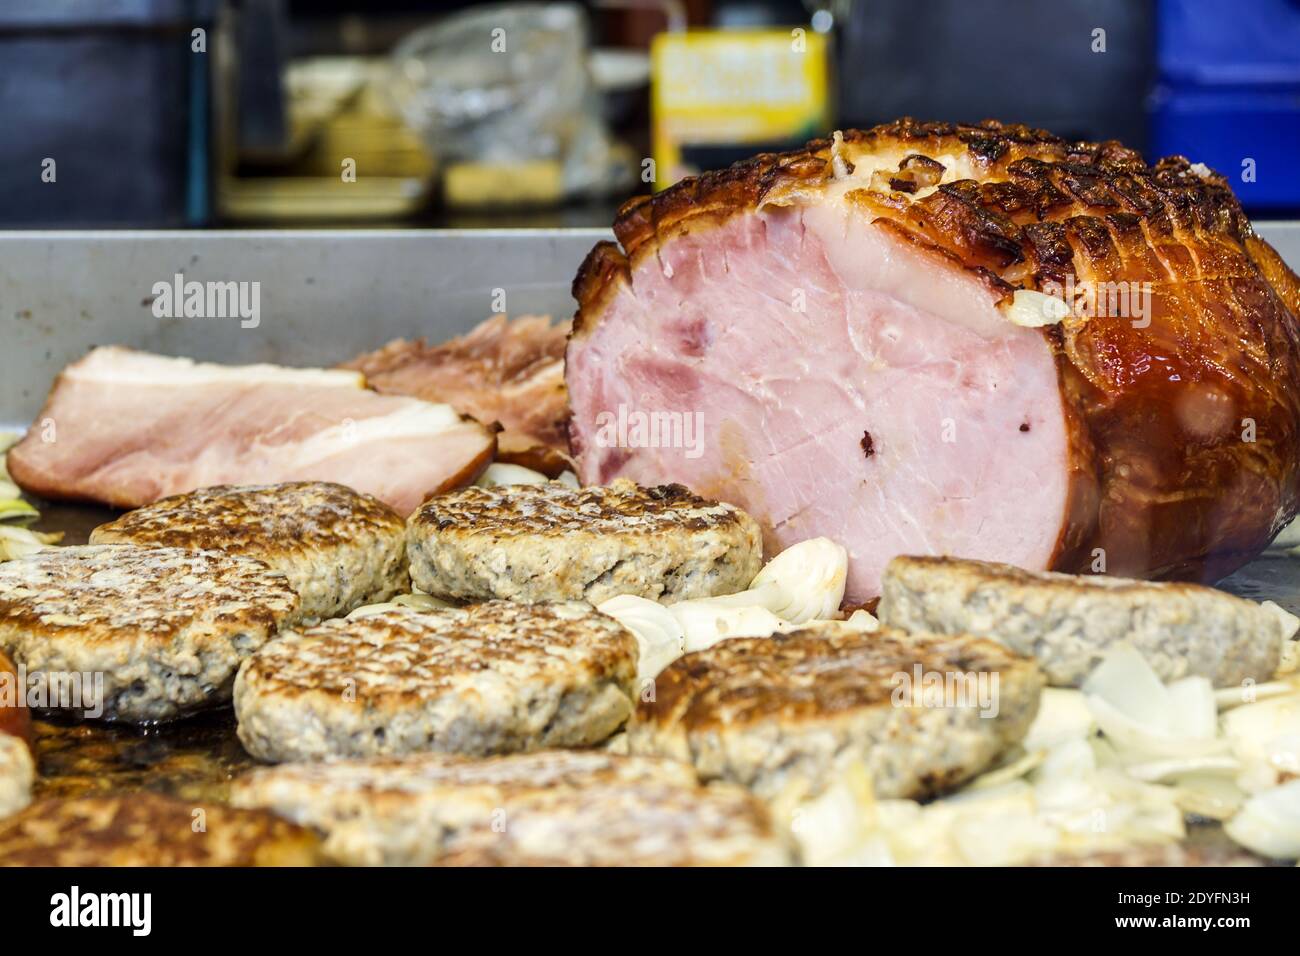 Homemade Rolled Porchetta Roast with Several Herbs Stock Photo